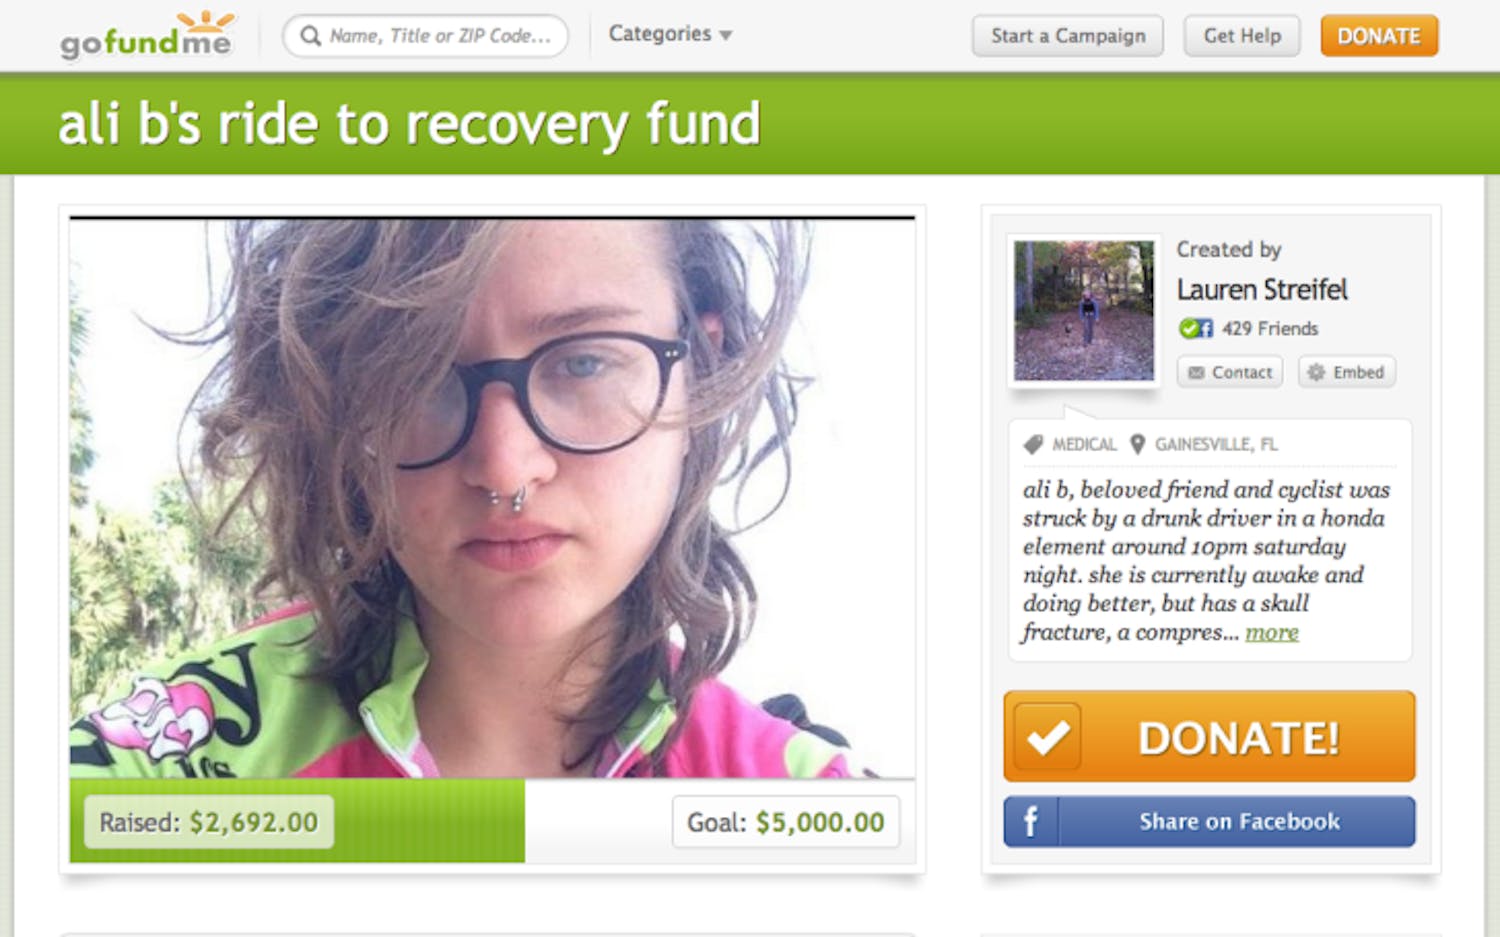 Ali Brody’s friend started a GoFundMe page to help raise money for medical and living expenses during her recovery. She was hit by a drunken driver Saturday night and was released from the hospital Monday.